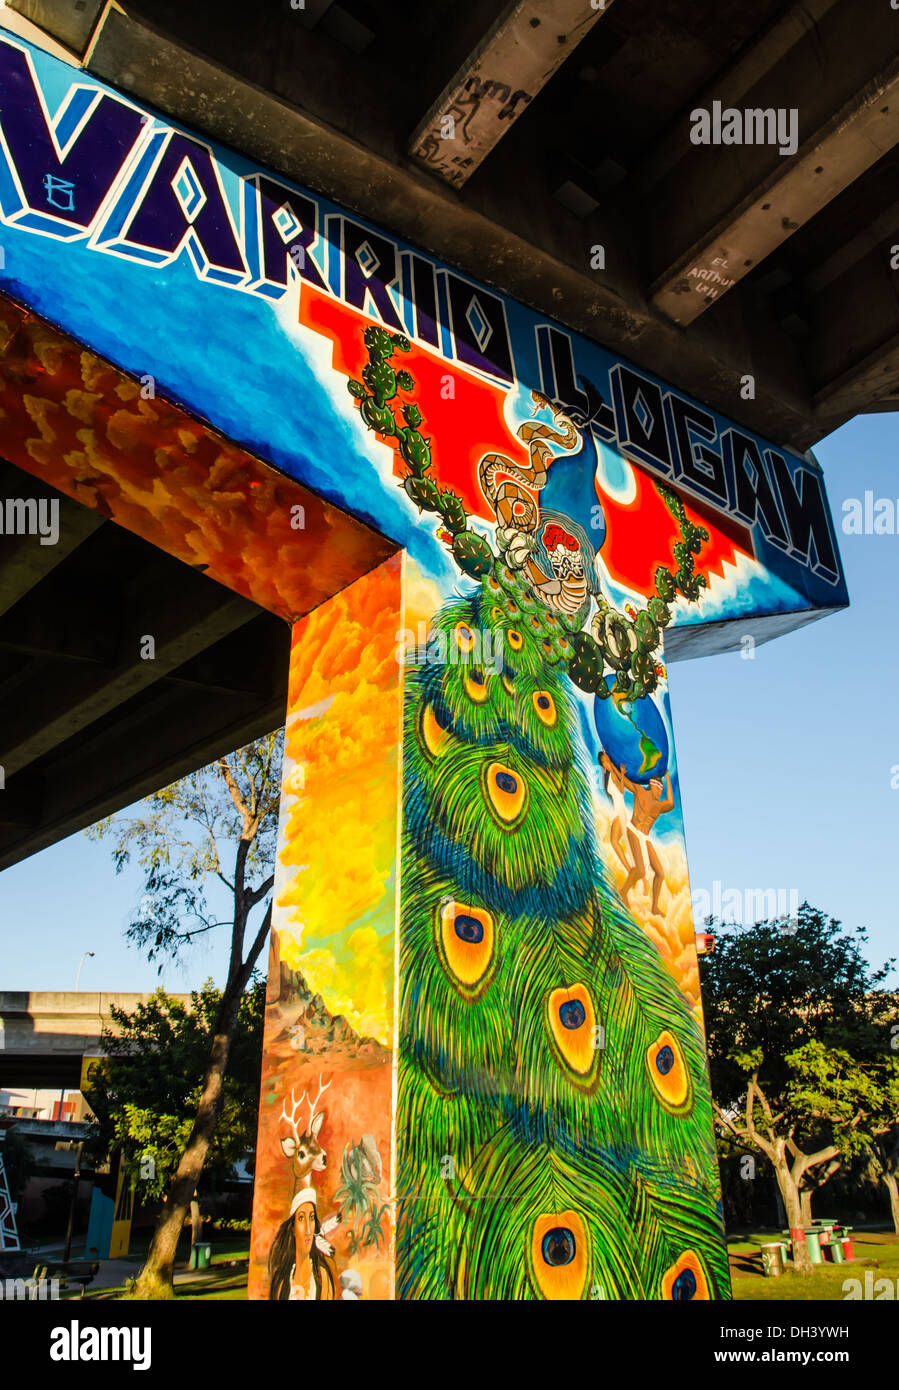 An image of a colorful mural located at Chicano Park in the Barrio Logan community of San Diego, California, United States. Stock Photo